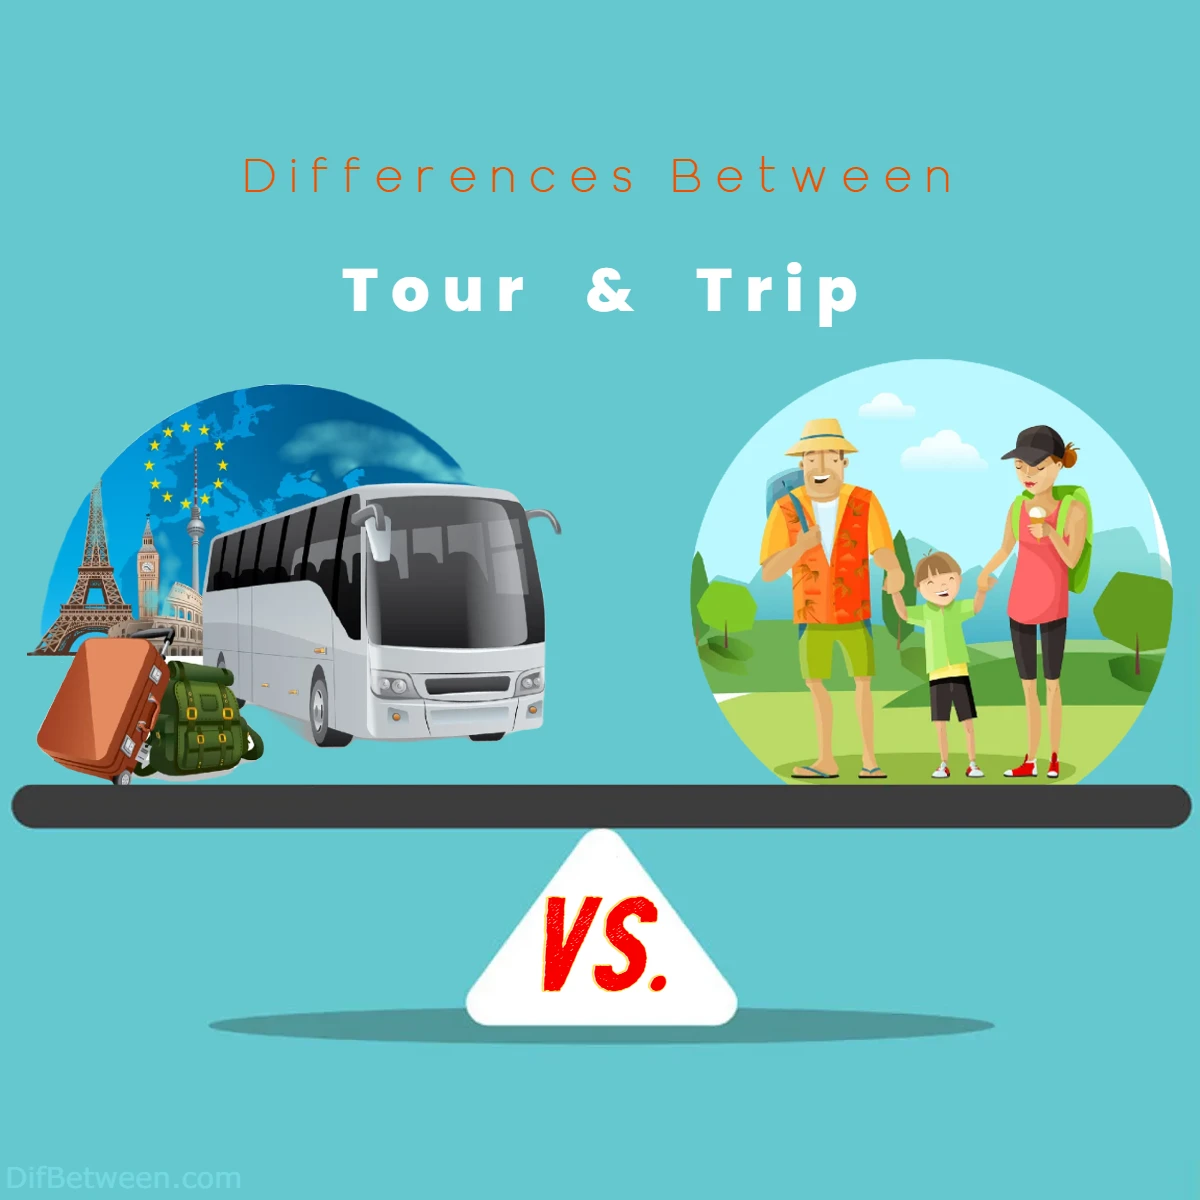 Differences Between Tour vs Trip